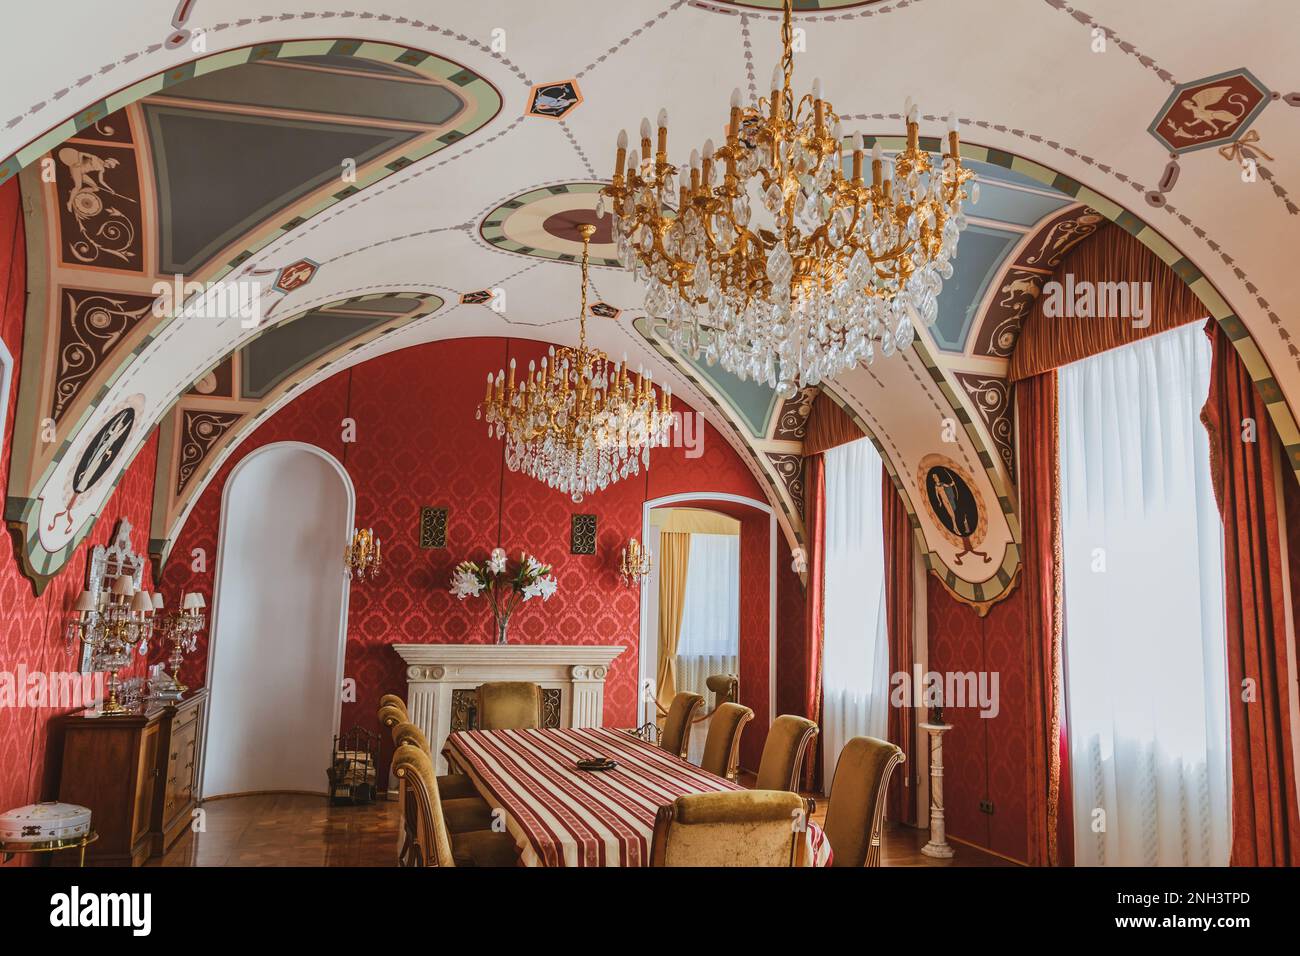 The interior spaces and furnishings of Acsaújlaky Castle or Patay Castle evoke the world of luxury, elegance and aristocratic lifestyle, Acsa, Hungary Stock Photo